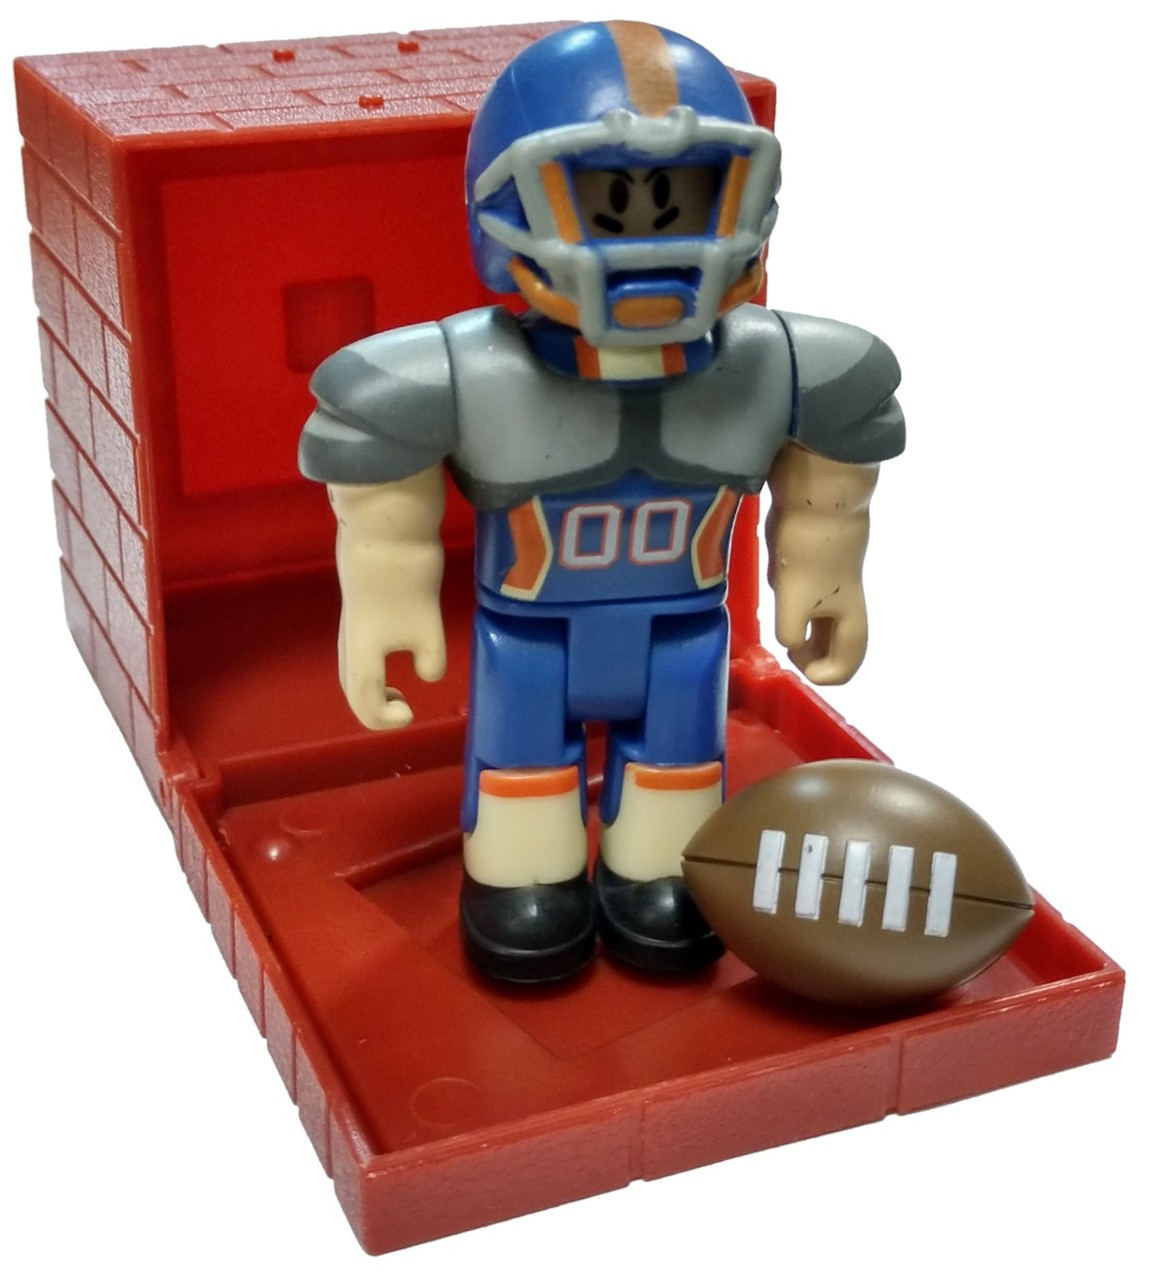 Roblox Red Series 4 Roblox High School Quarterback 3 Mini Figure With Red Cube And Online Code Loose Jazwares Toywiz - robloxian highschool codes for clothes robux card codes